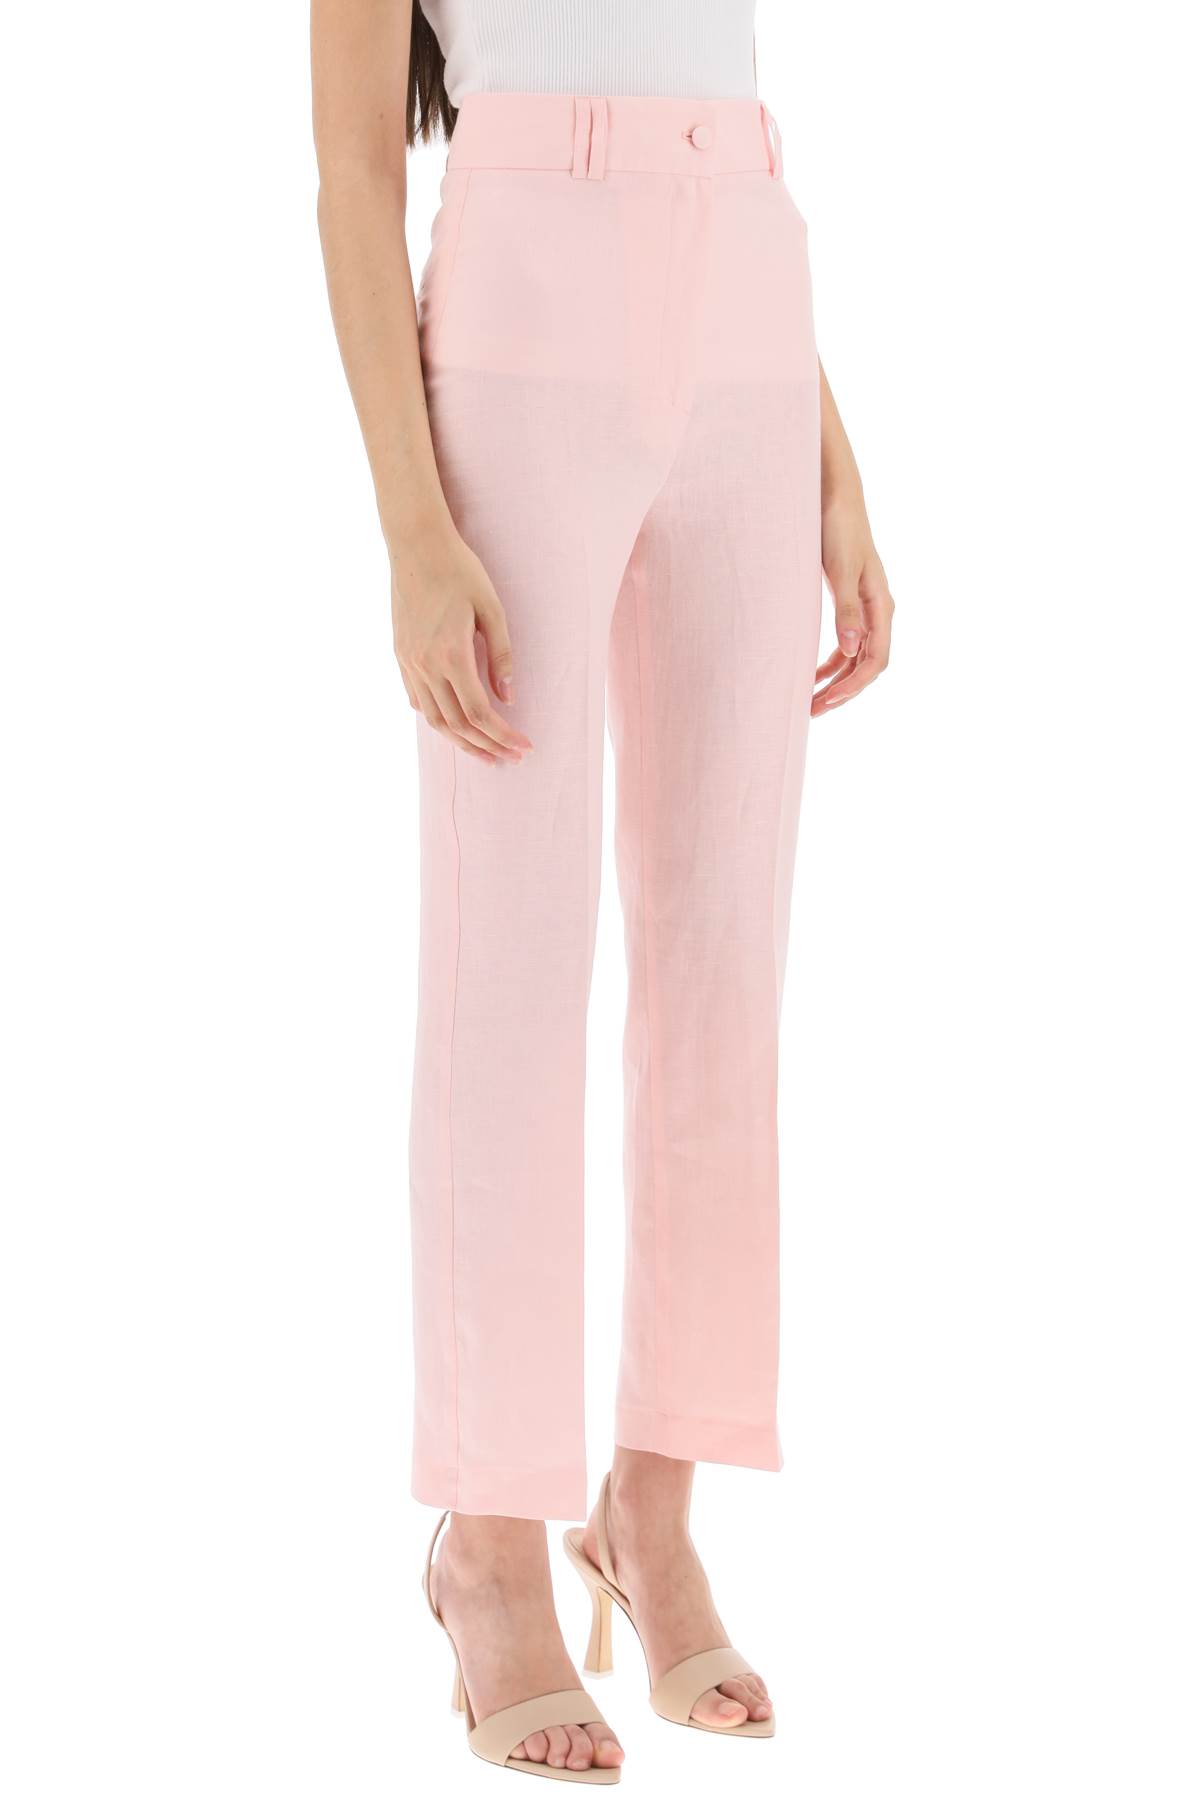 Shop Hebe Studio Loulou Linen Trousers In Pink Calypso (pink)